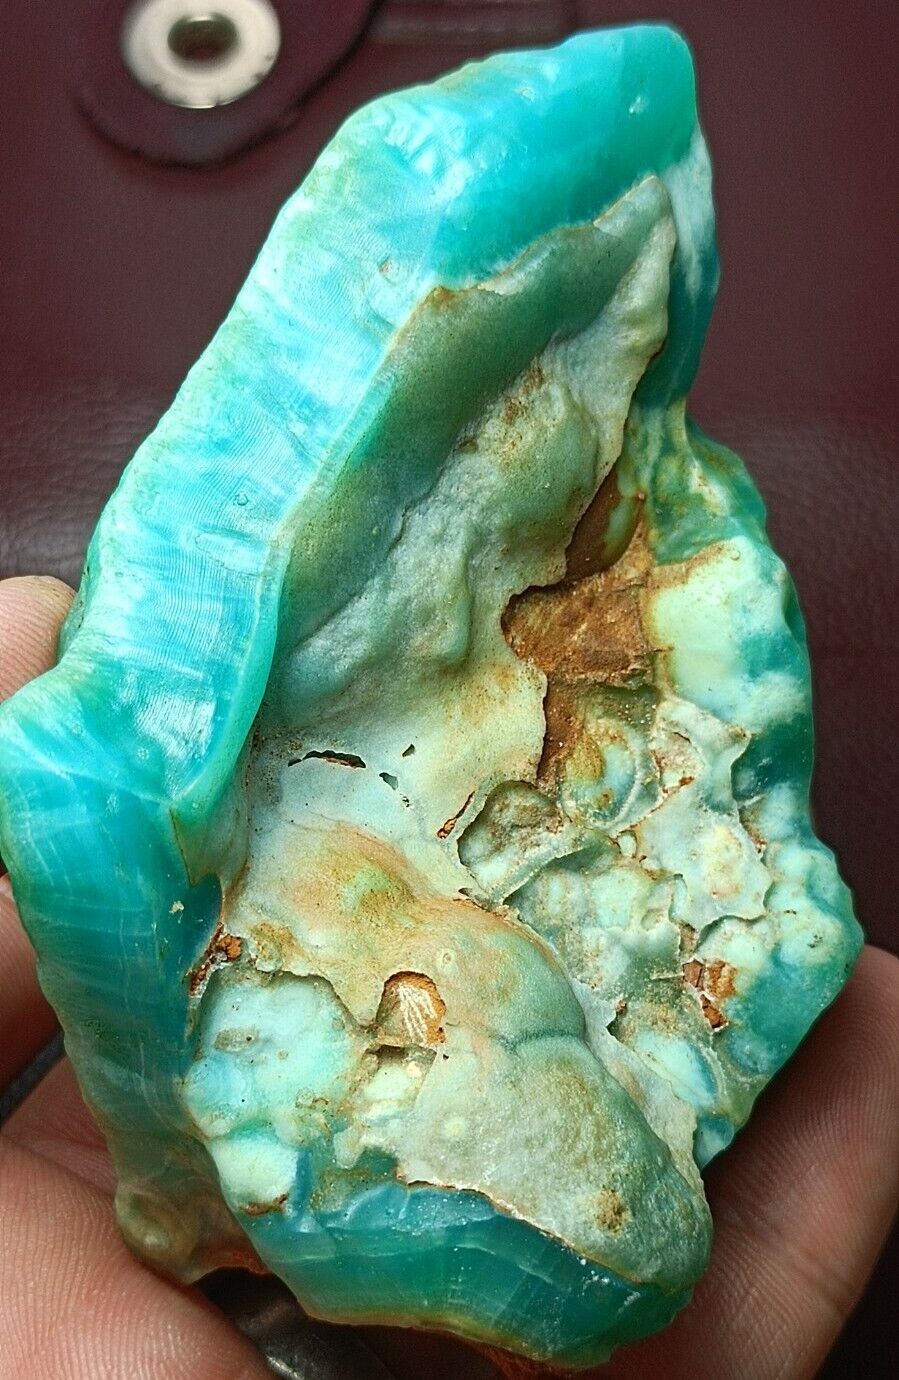 178g Bluish/Green Aragonite Cluster With Nice Color And Formation From Afghanist